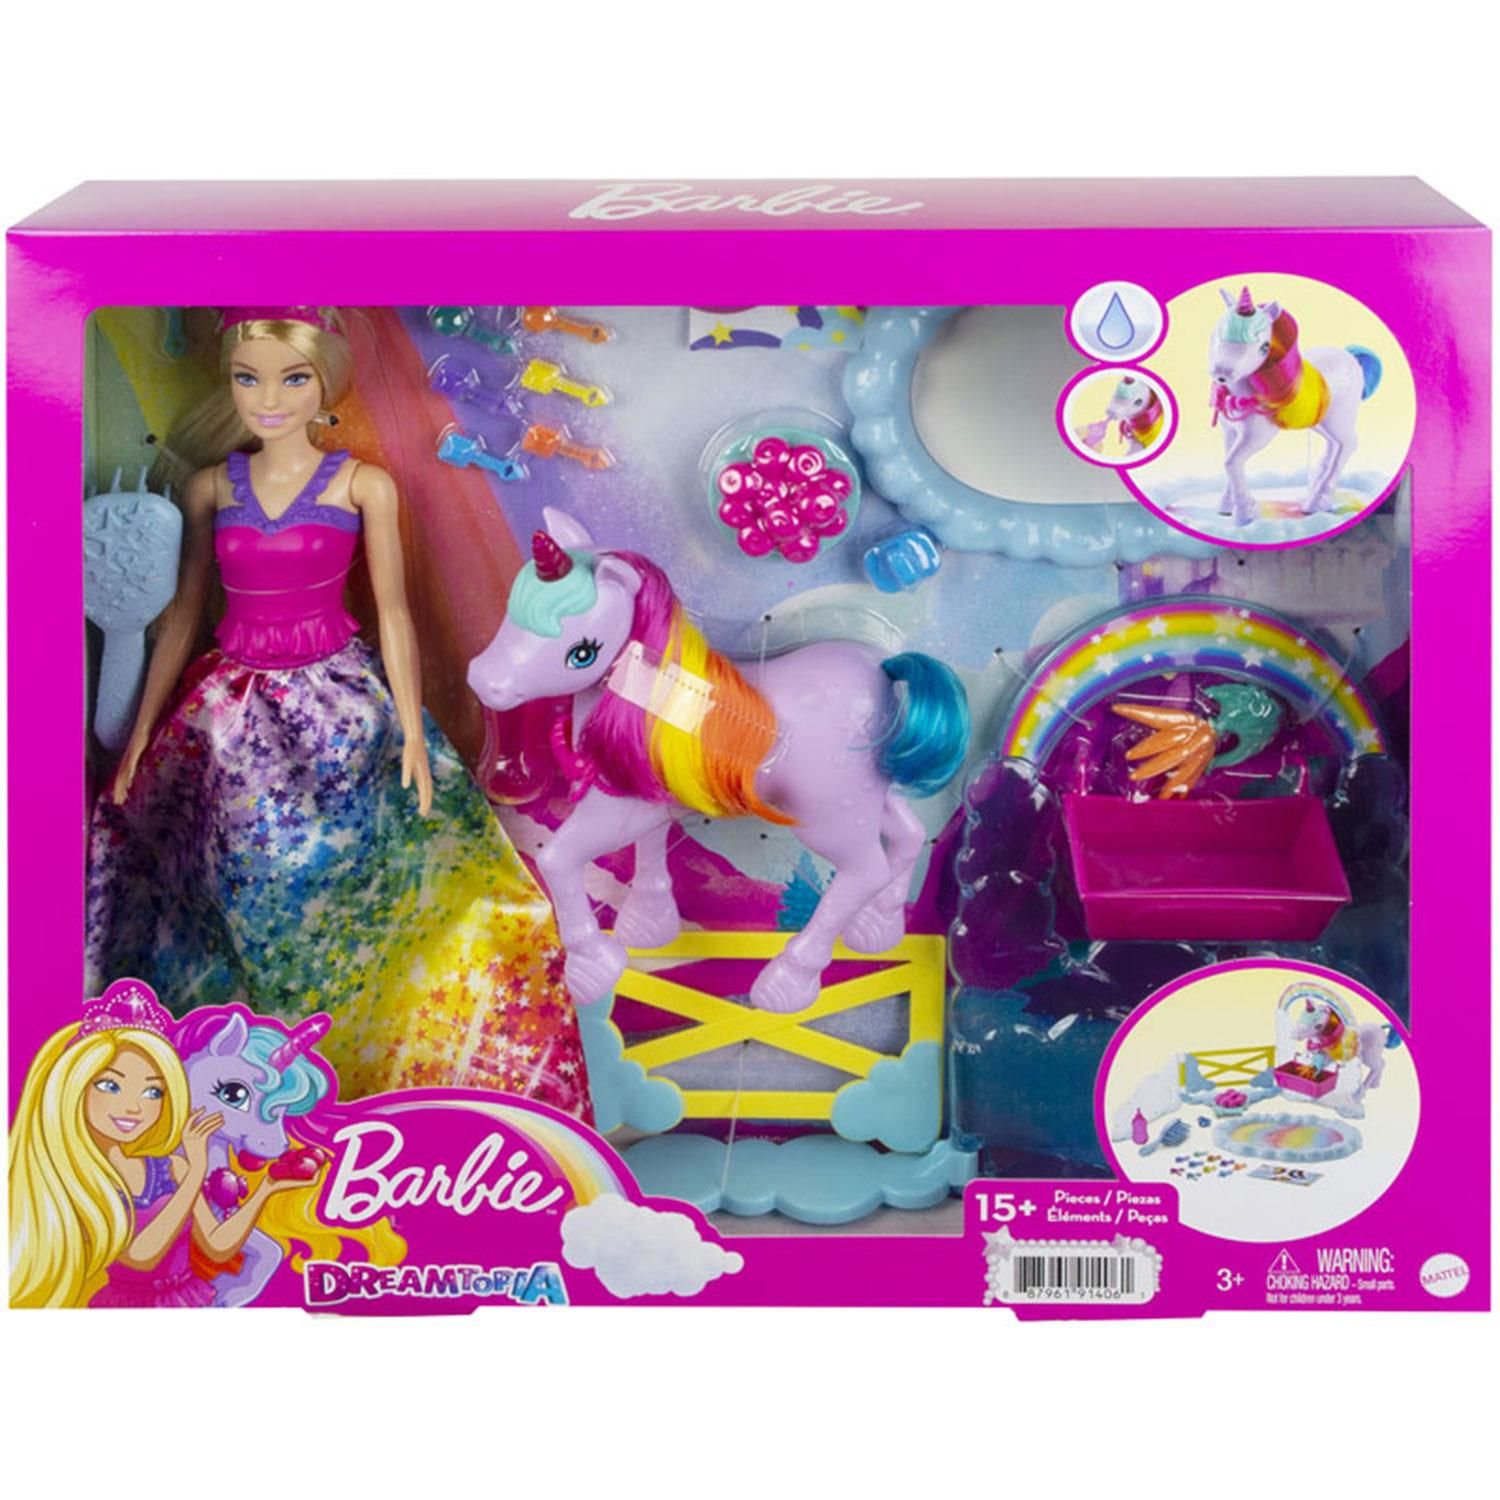 Barbie Dreamtopia Unicorn Pet Playset with Princess Doll

This Barbie Dreamtopia playset inspires kids to create all kinds of nurturing fairytale adventures! The Barbie princess doll can take care of her pet unicorn toy. Fill the bottle with water and help the Barbie doll feed her unicorn friend. The potty pad will change colour from white to a beautiful rainbow! This Barbie playset comes with a toy unicorn trough, snacks, hairbrushes (for Barbie princess and her unicorn) and 10 doll accessories for many imaginative play possibilities. Makes an excellent gift for kids aged 3+.

Features:

With a magical Colour change feature and so many accessories
This Barbie princess doll and unicorn playset makes the perfect gift
Doll cannot stand alone.
Colours and decorations may vary.

Specifications:

Toy Type: Unicorn Doll Play Set
Material: Abs Plastic
Colour: Multicolour
Age Range: 3 Years & Above

Box Contains:

1x Barbie Doll
1x toy unicorn trough
1x snacks
1x hairbrushes
1x grooming brush
10x doll accessories